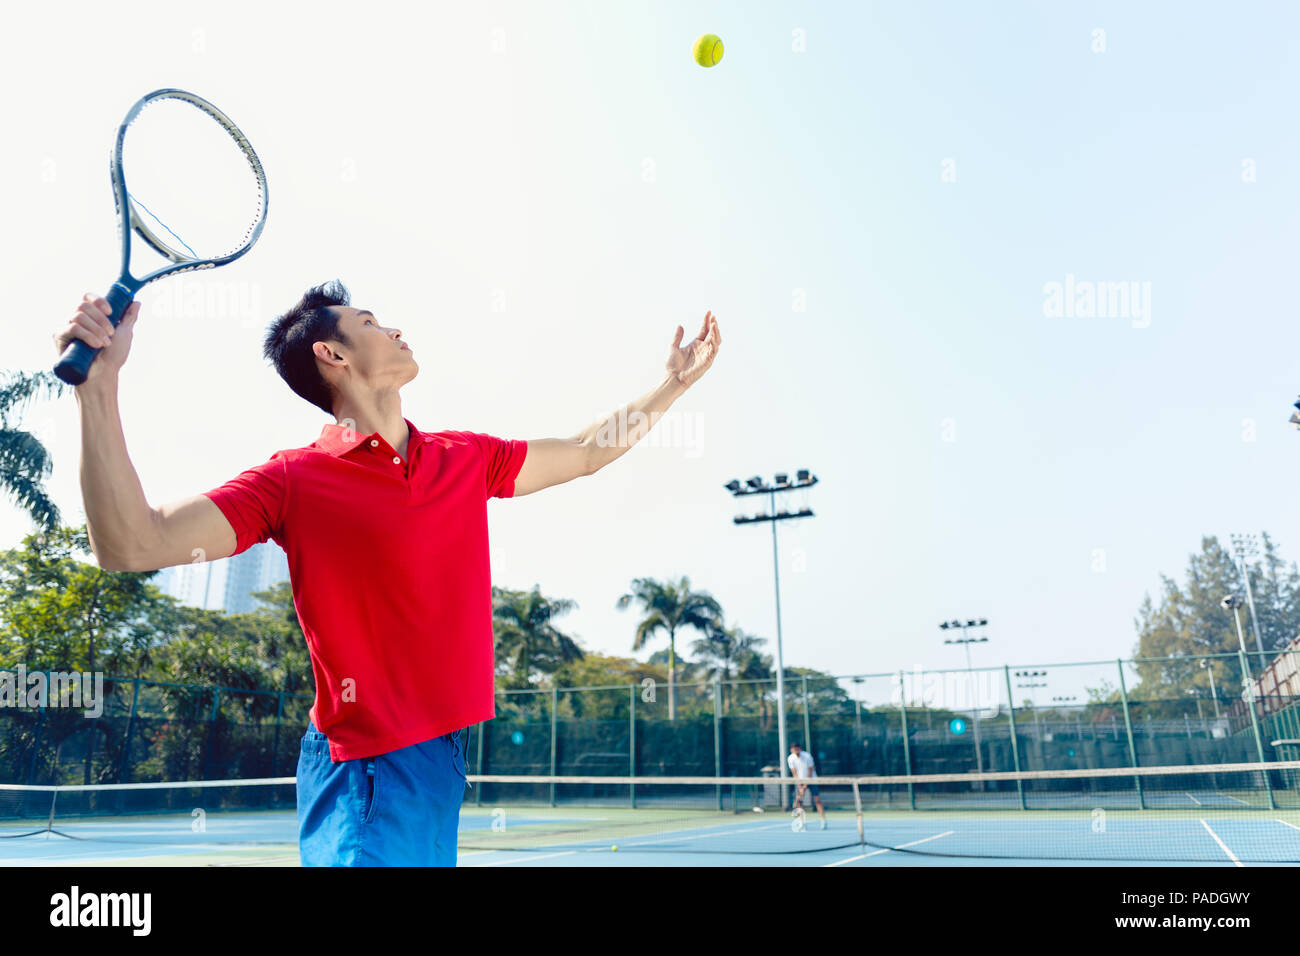 Chinese tennis player ready to hit the ball while serving Stock Photo